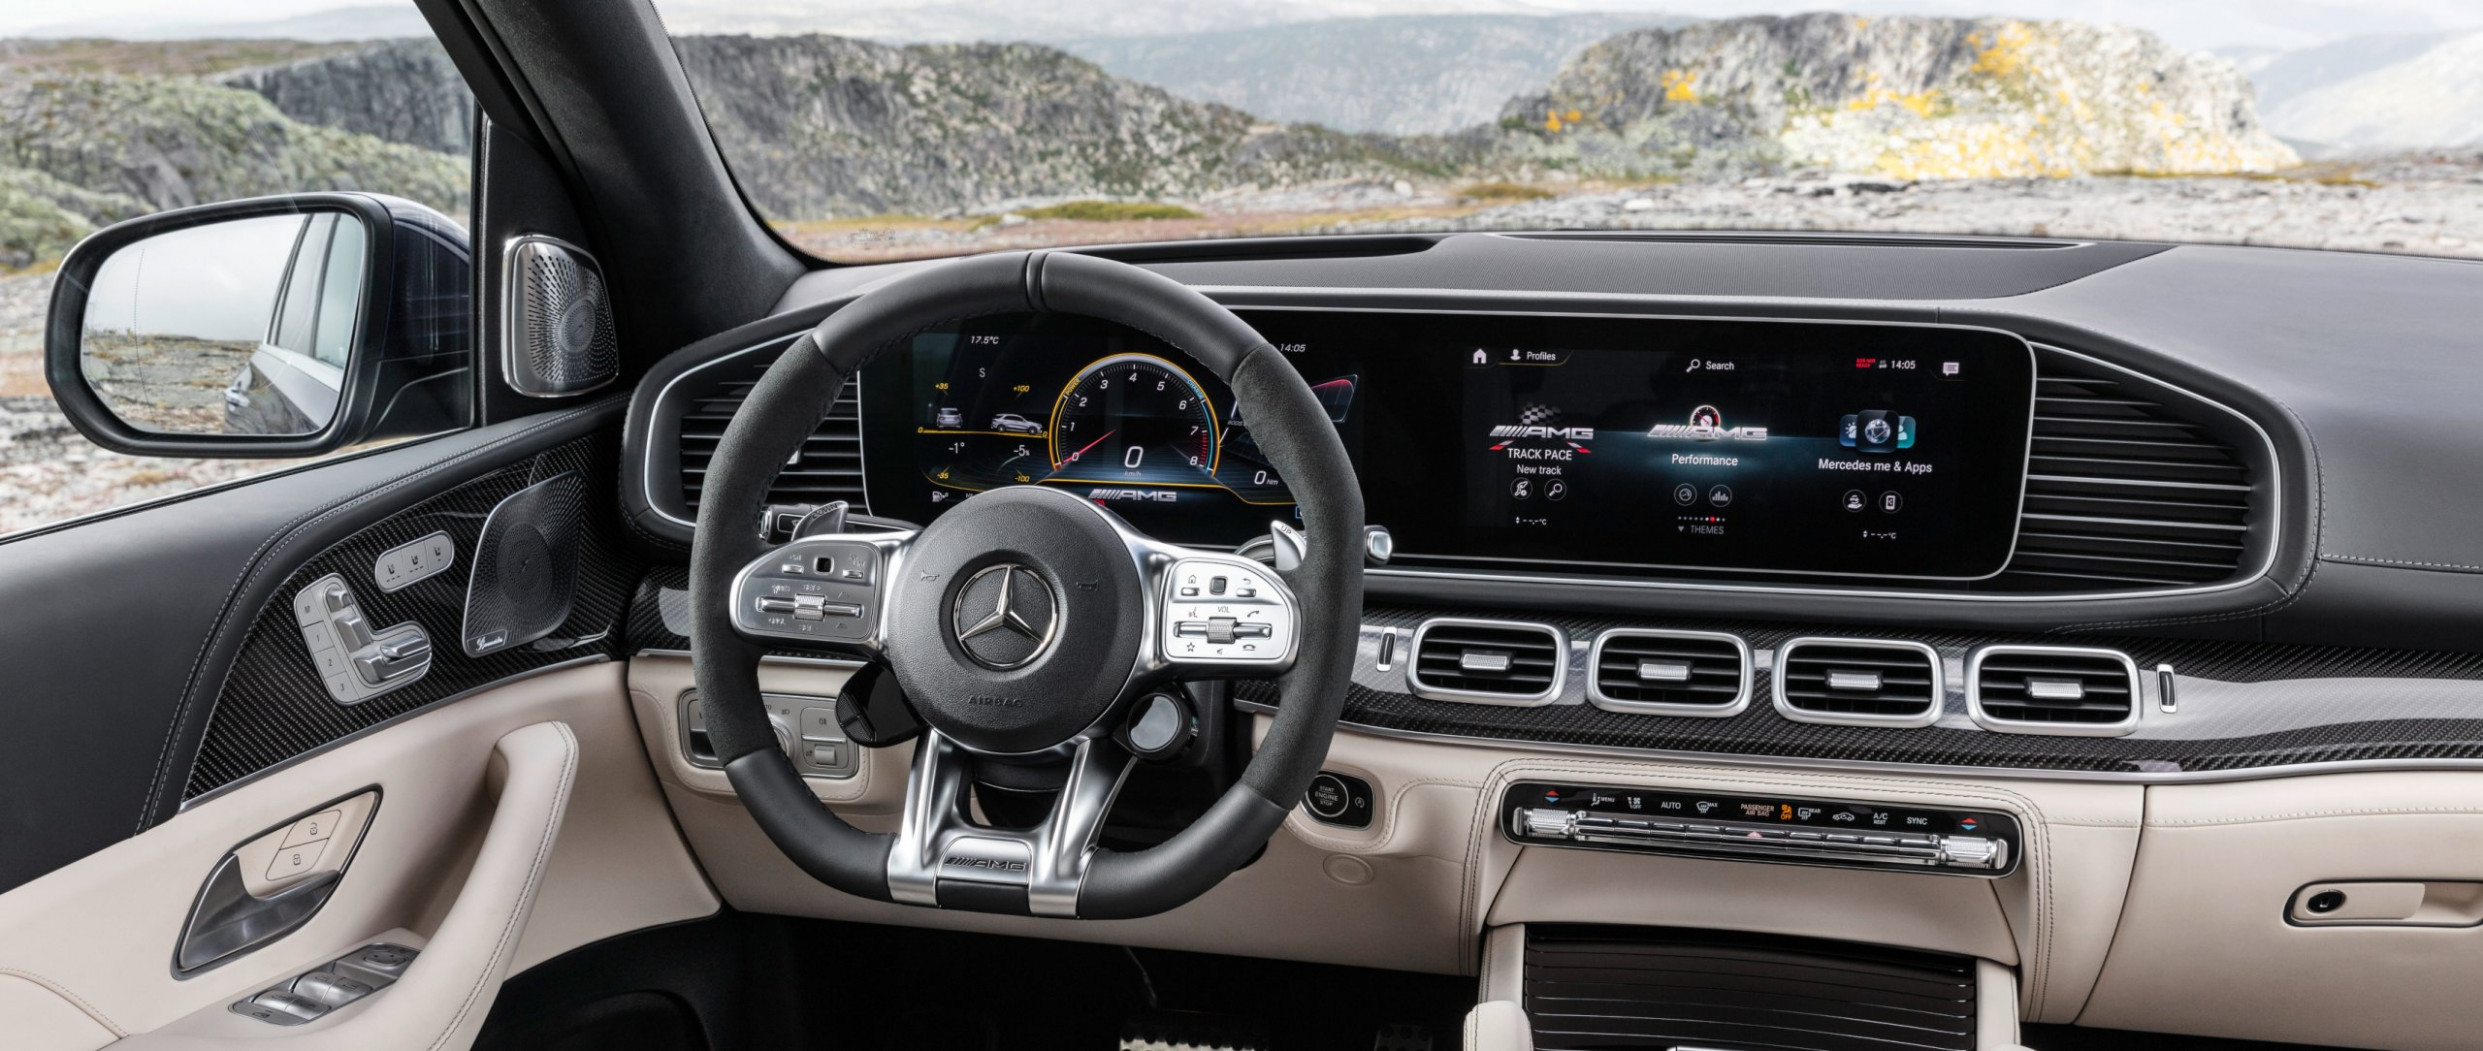 Pictures amg gle 63 interior